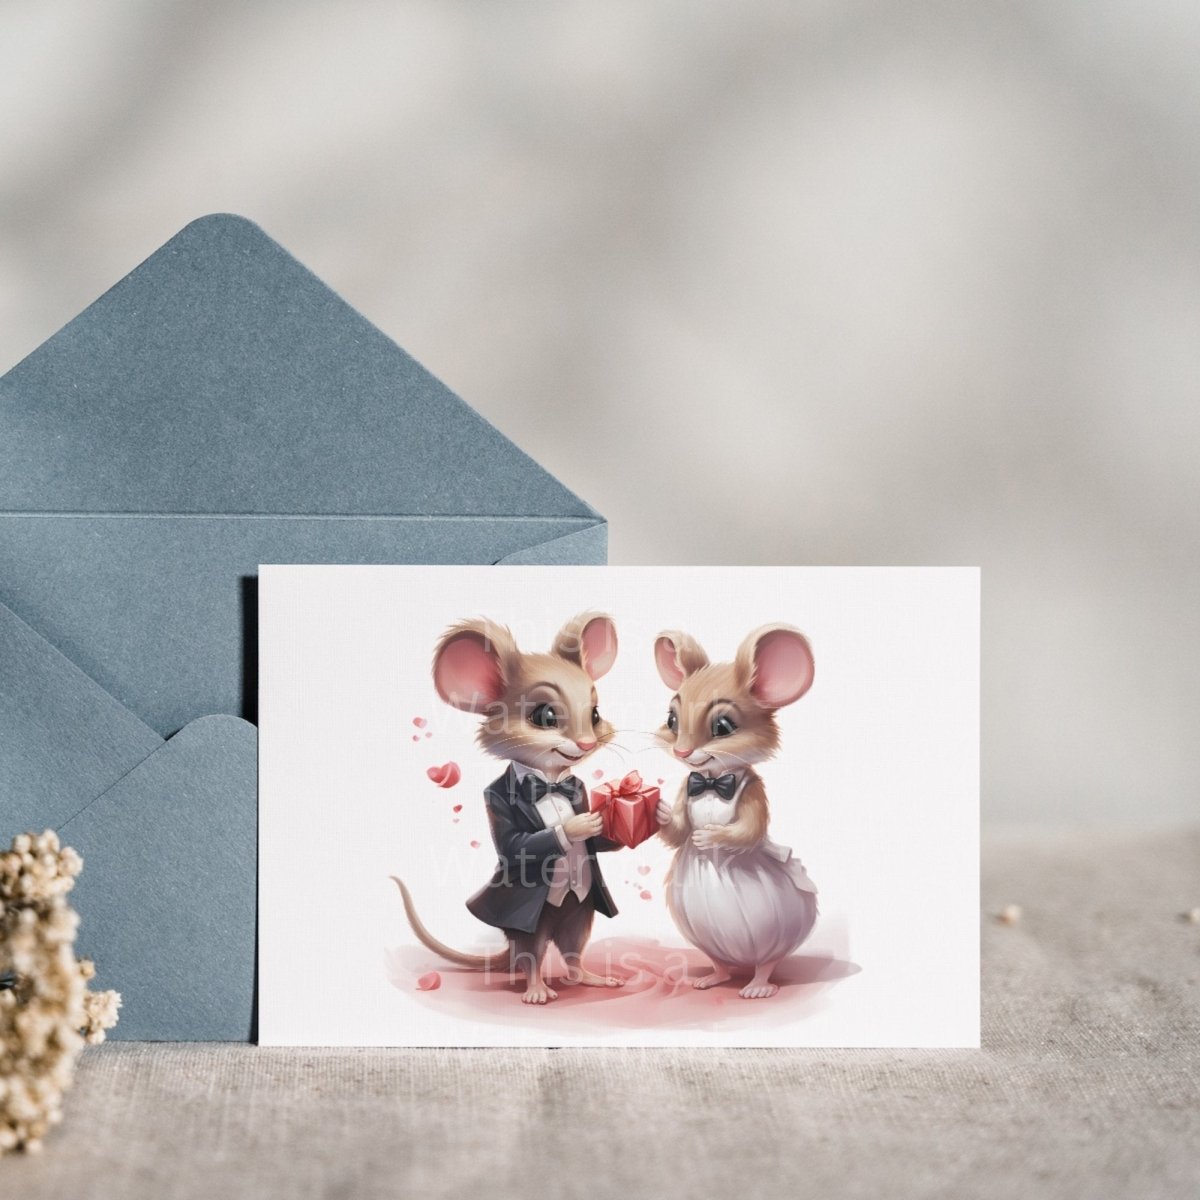 Cute Mice in Love 20 PNG Bundle Valentine Mouse Graphics Mouse with Heart Cute Romantic Valentine Images Card Crafting Junk Journal Kit - Everything Pixel